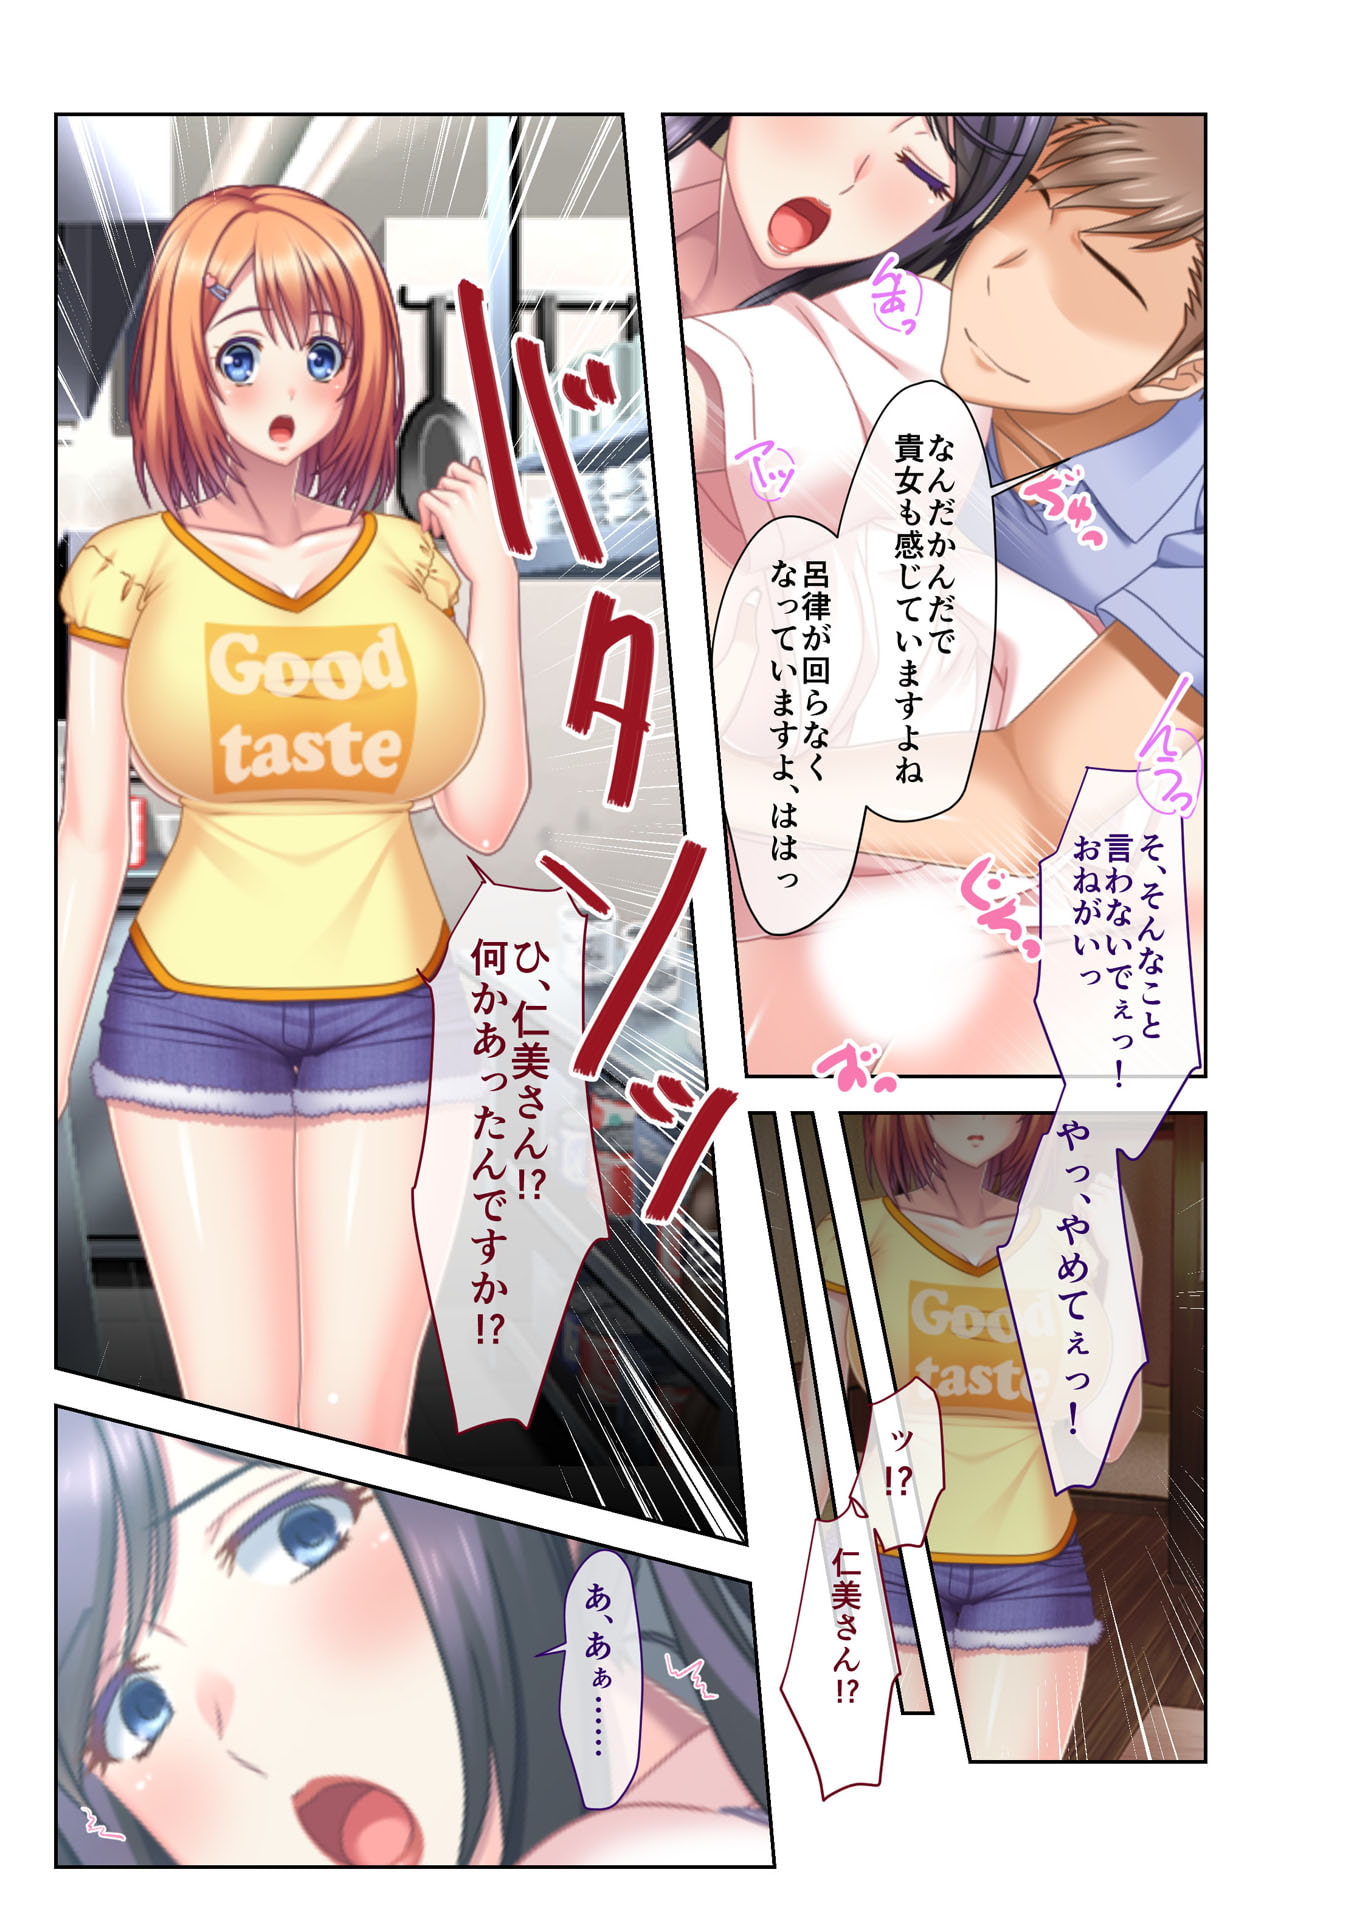 Bangable Cafeteria - Busty Beauties Moan In Ero Massage! (2) [Full Color Comic Ver]